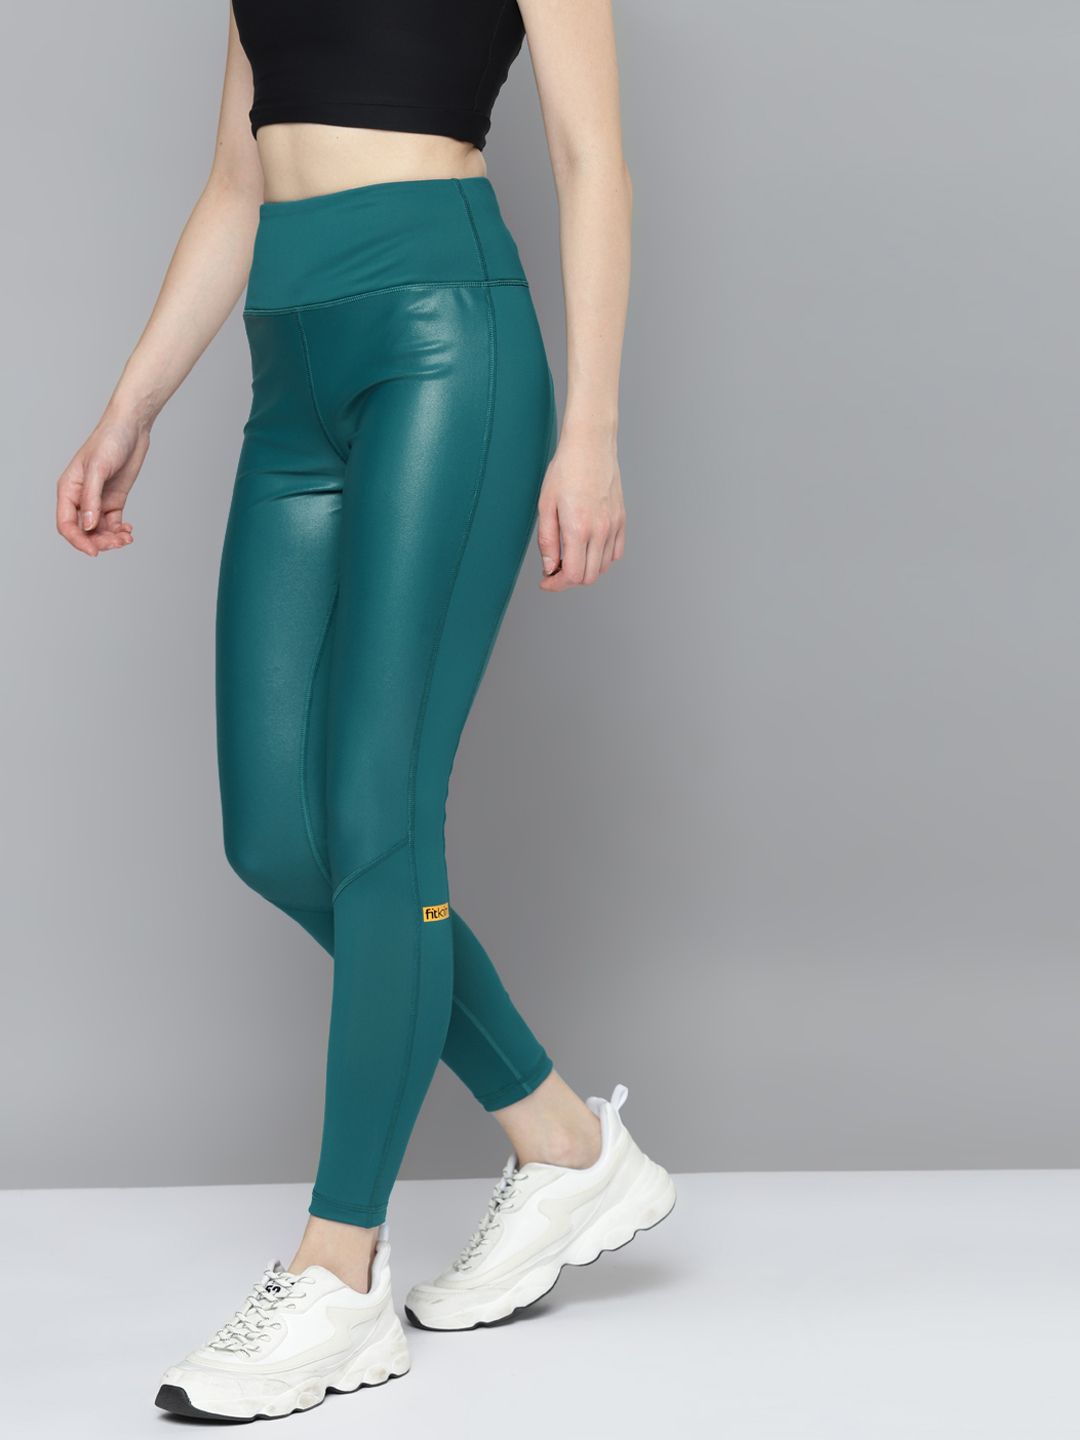 Fitkin Women Teal Green Solid Rapid Dry Training Tights Price in India